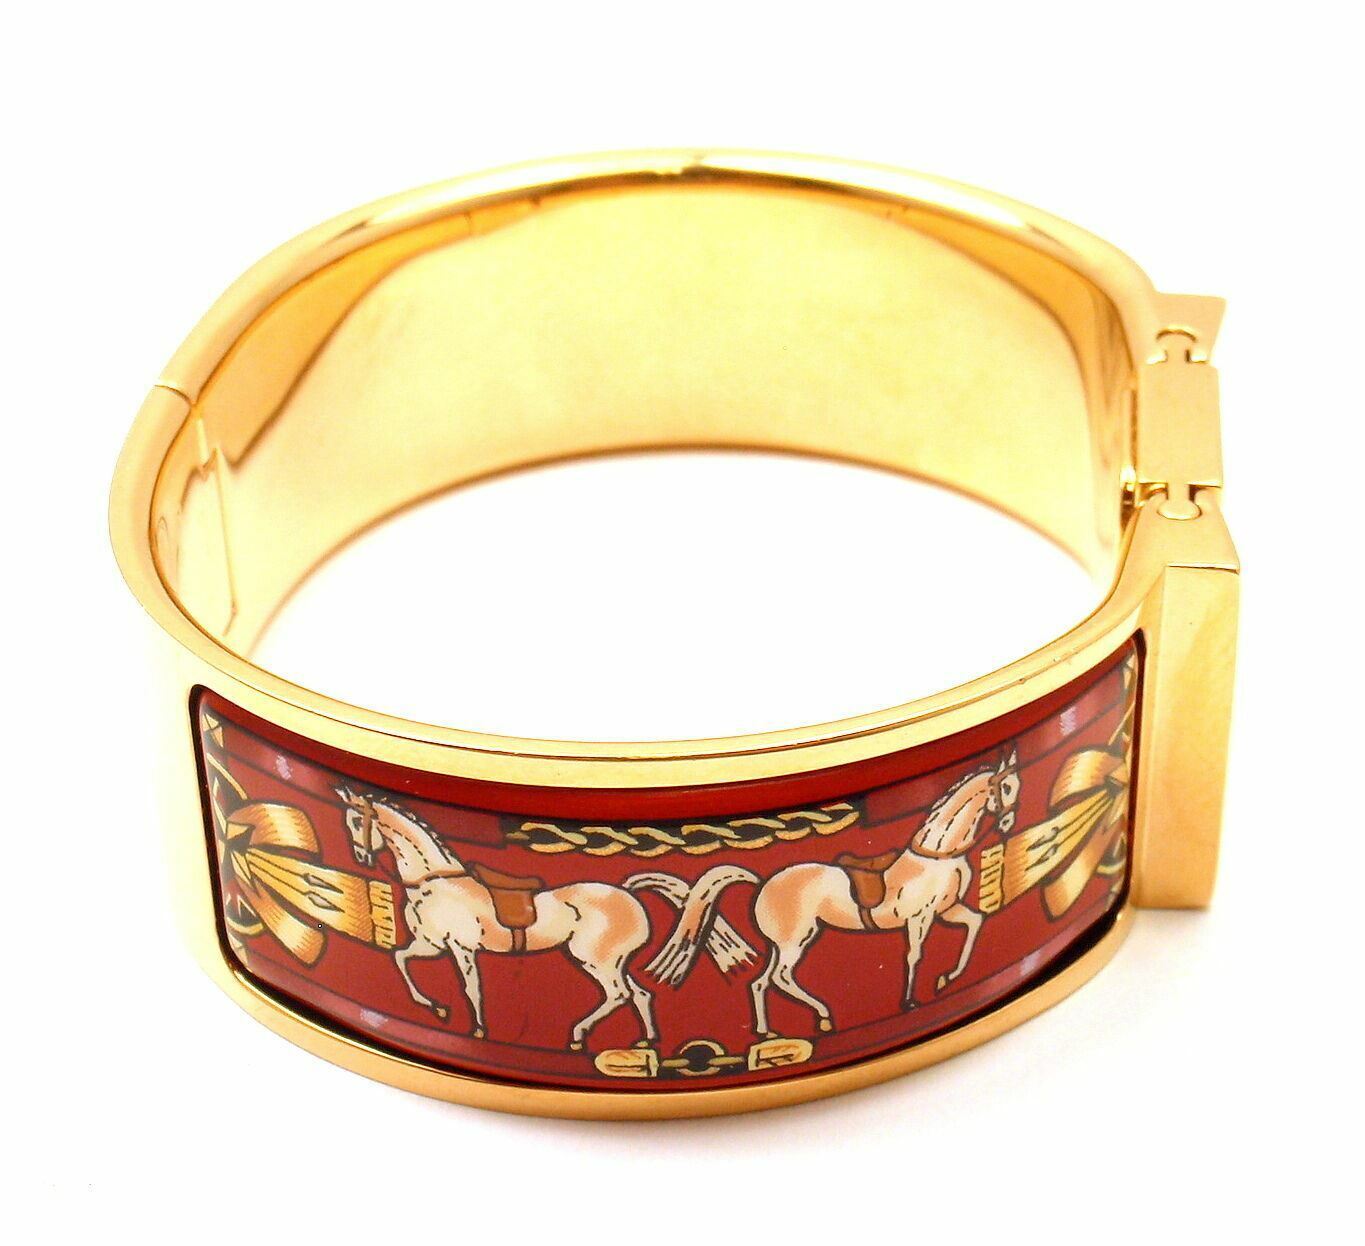 Hermes Jewelry & Watches:Watches, Parts & Accessories:Watches:Wristwatches Authentic! Hermes Loquet Red Horse Equestrian Motif Bangle Bracelet Watch